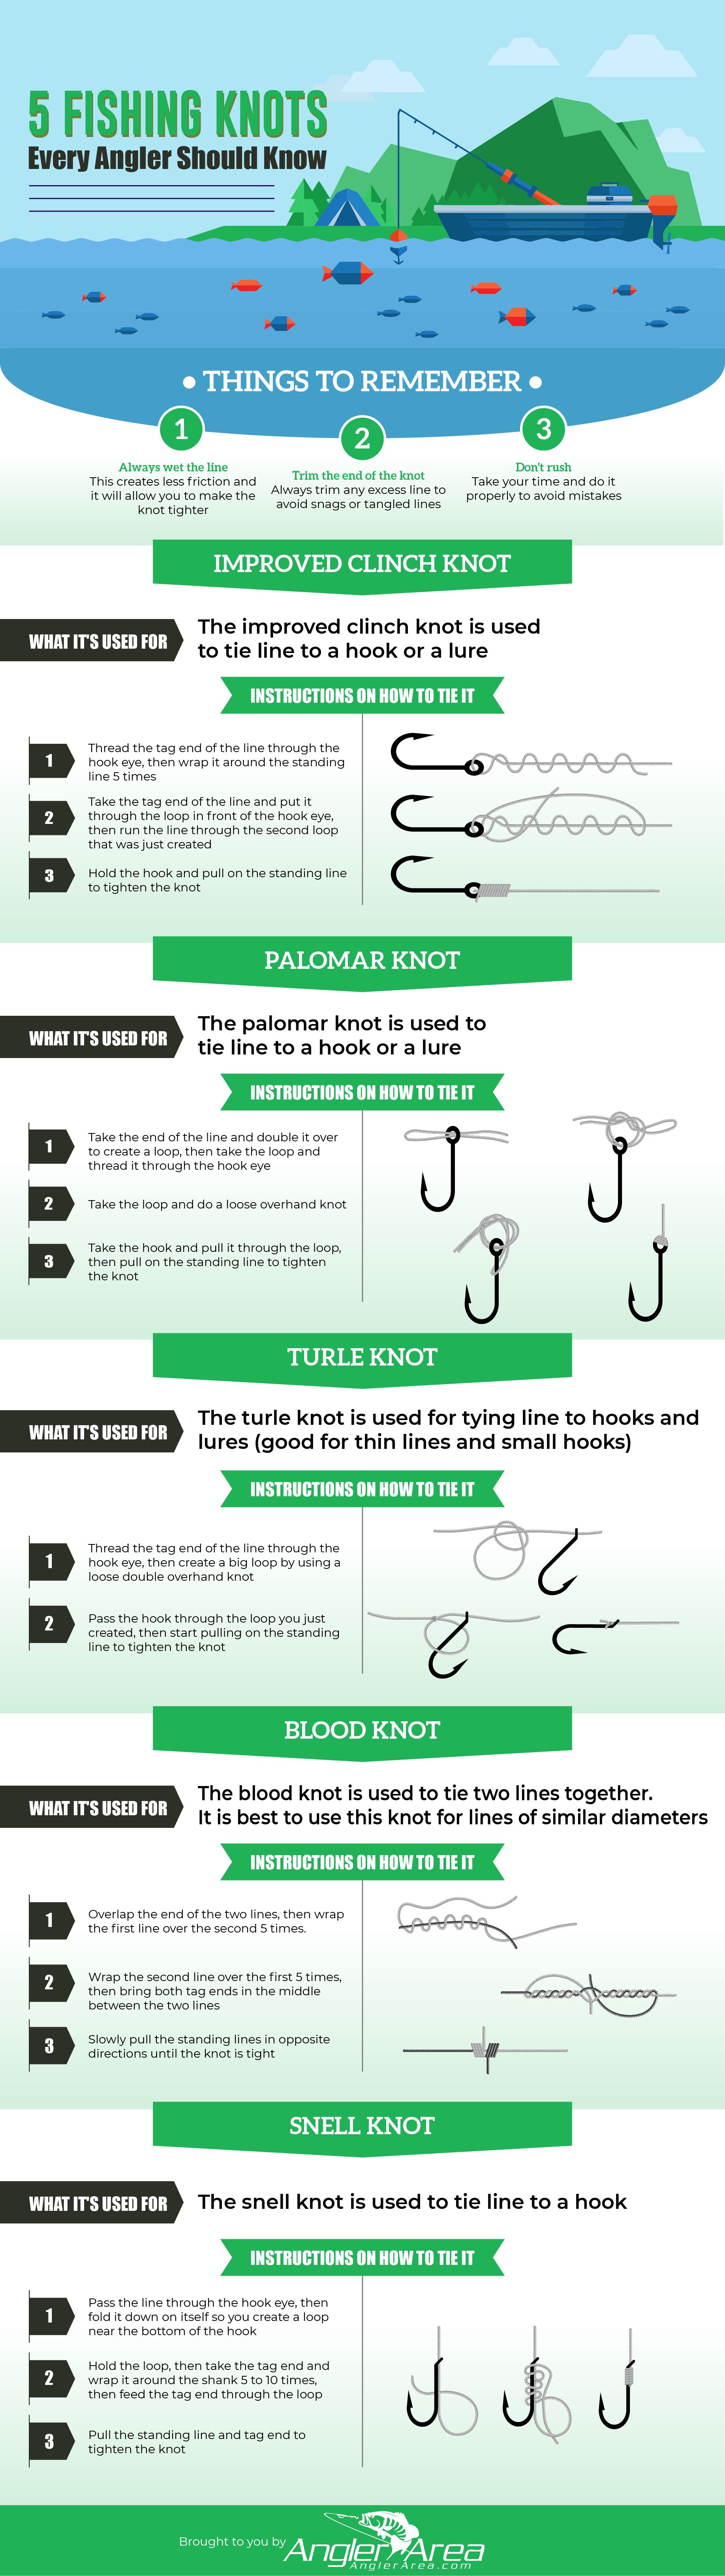 How-To-5-Fishing-Knots-Infographic